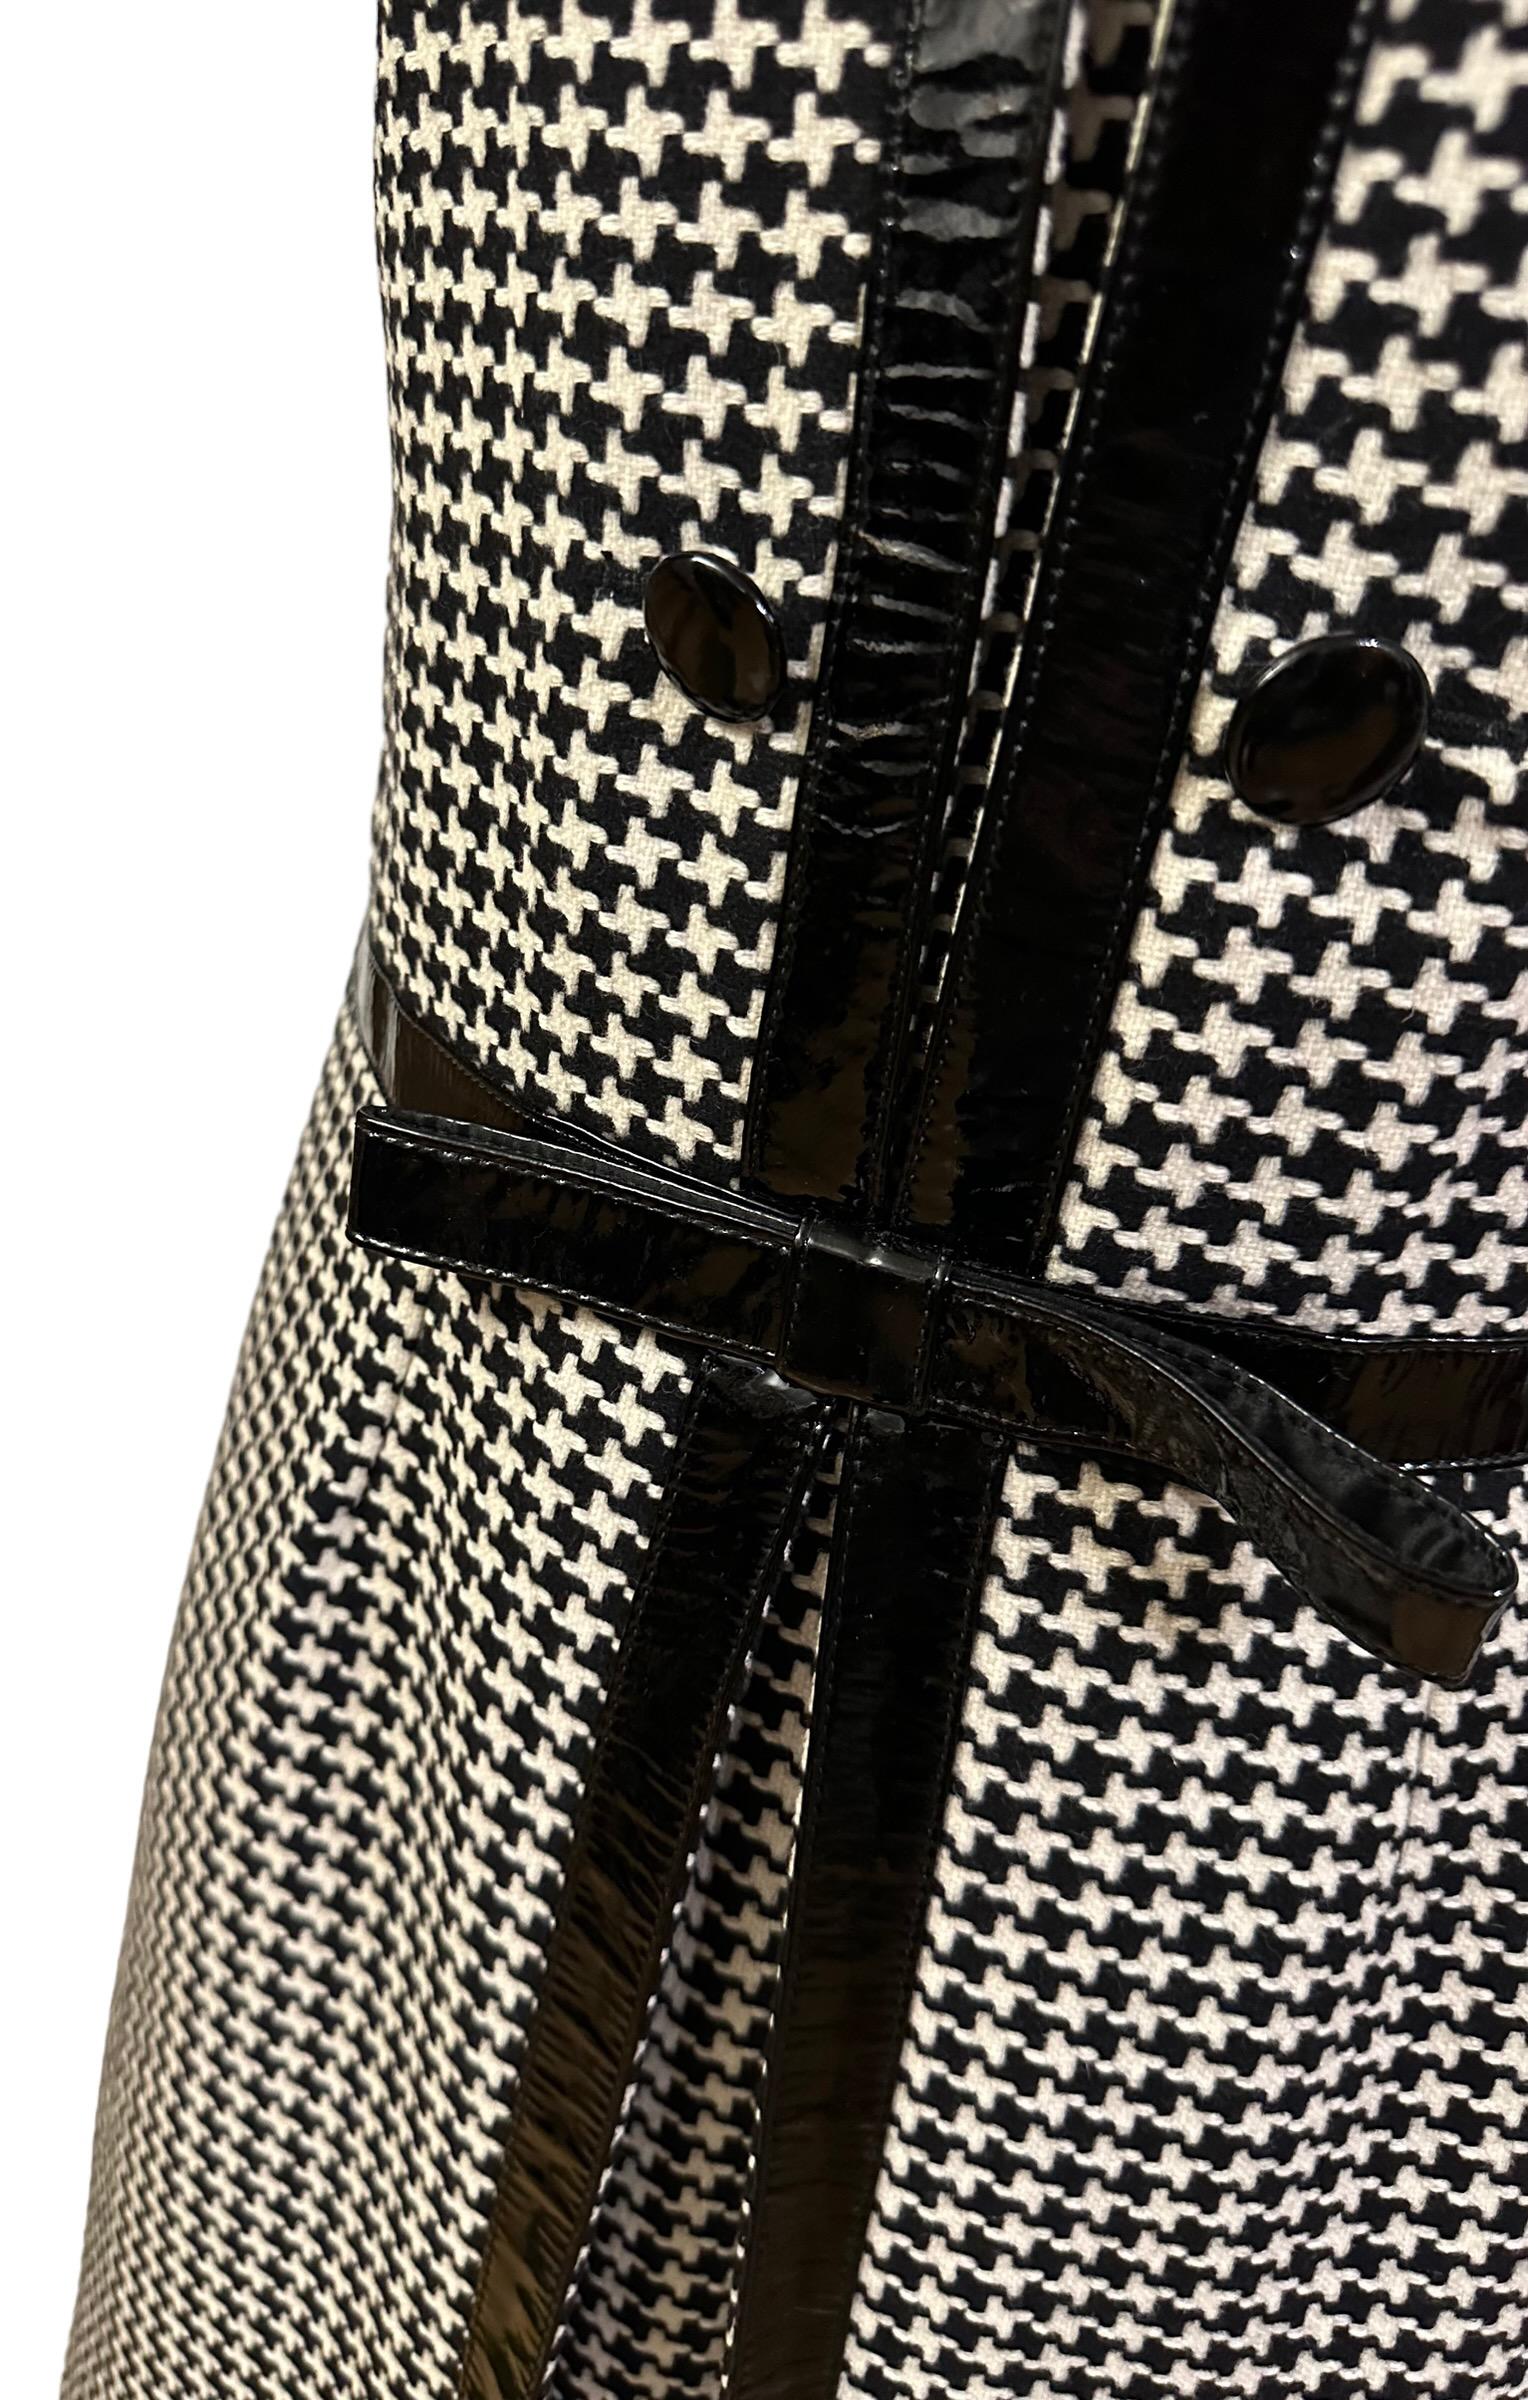 Christian Dior Fall 2008 Black and Off-white Houndstooth Dress by John Galliano In Good Condition For Sale In Geneva, CH